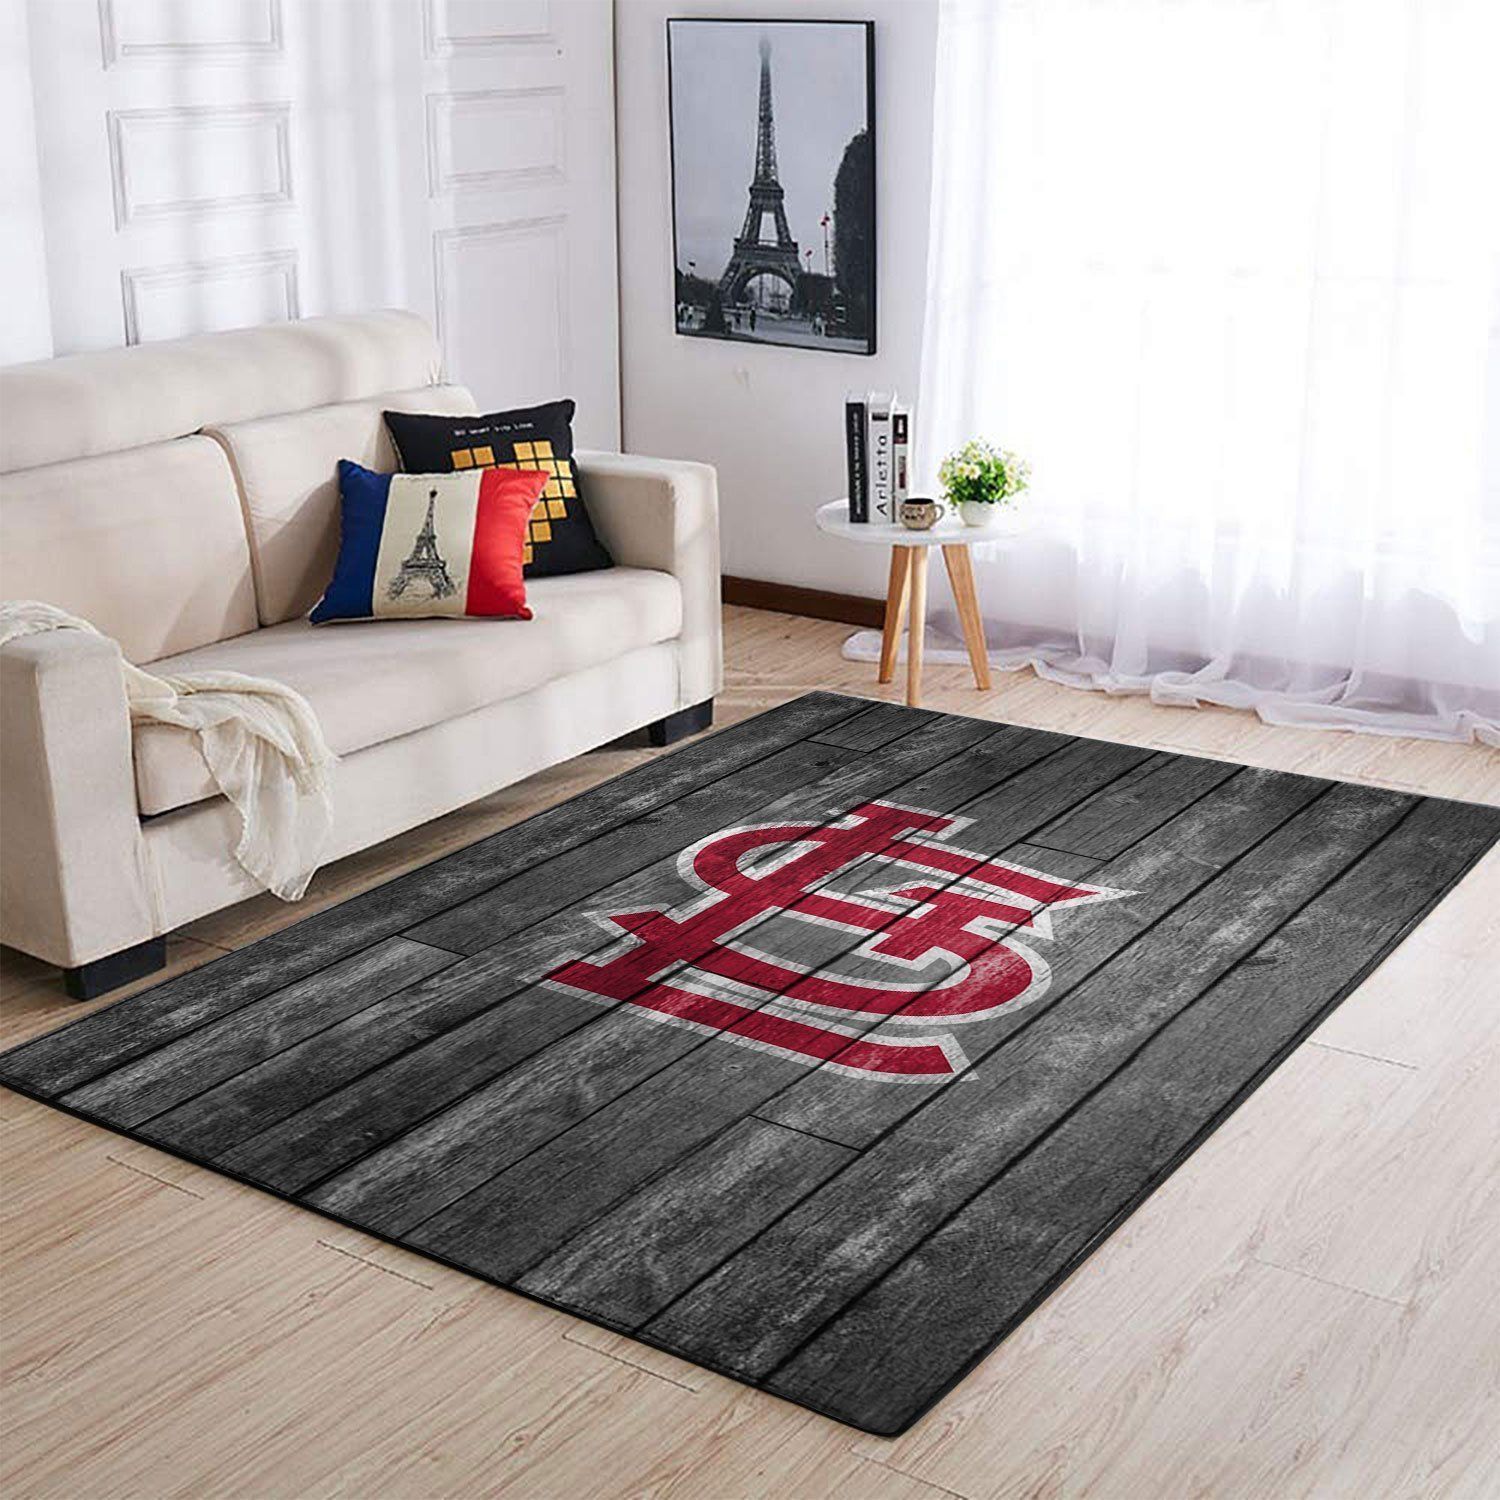 ST. LOUIS CARDINALS MLB TEAM LOGO GREY WOODEN STYLE STYLE NICE GIFT HOME DECOR RECTANGLE AREA RUG 180222